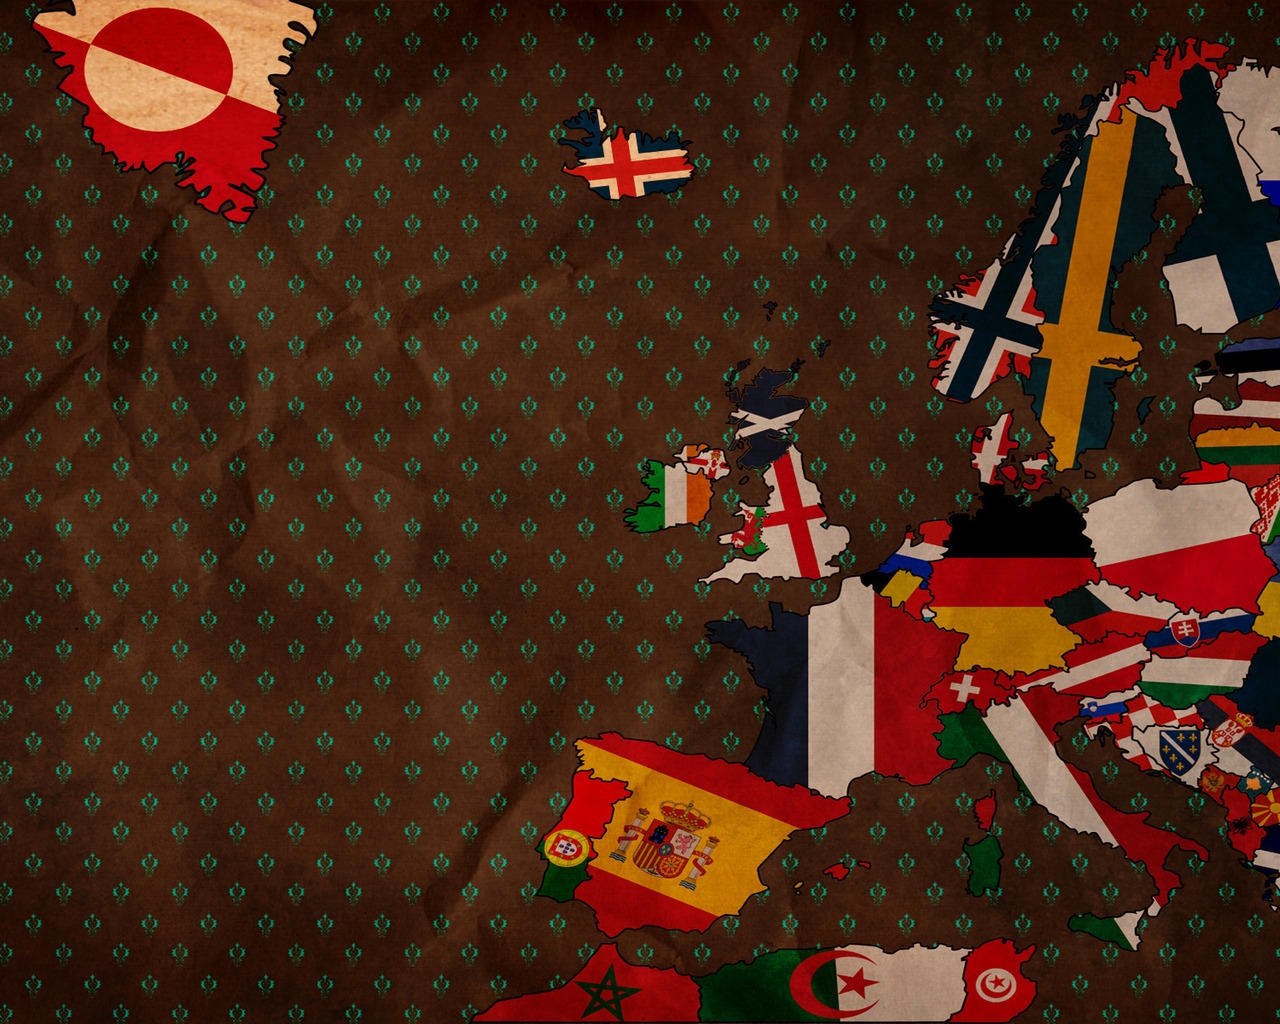 Bits of Flags for 1280 x 1024 resolution